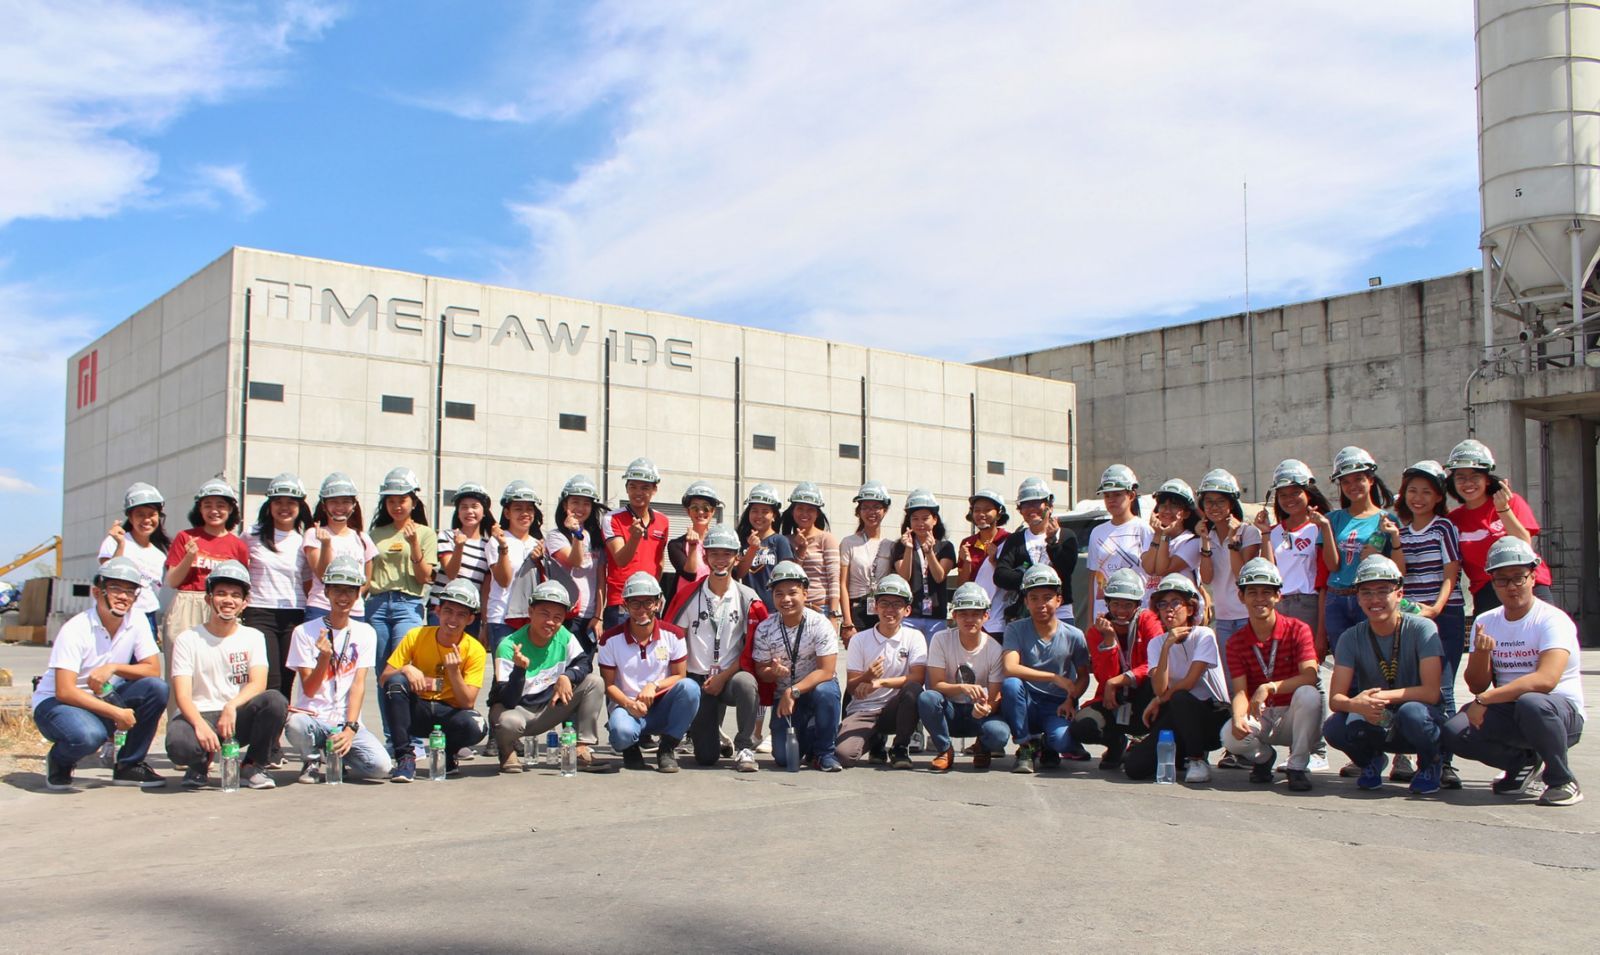 Megawide Foundation scholars visit the Megawide Taytay Industrial Plant and learn more about the business operations.